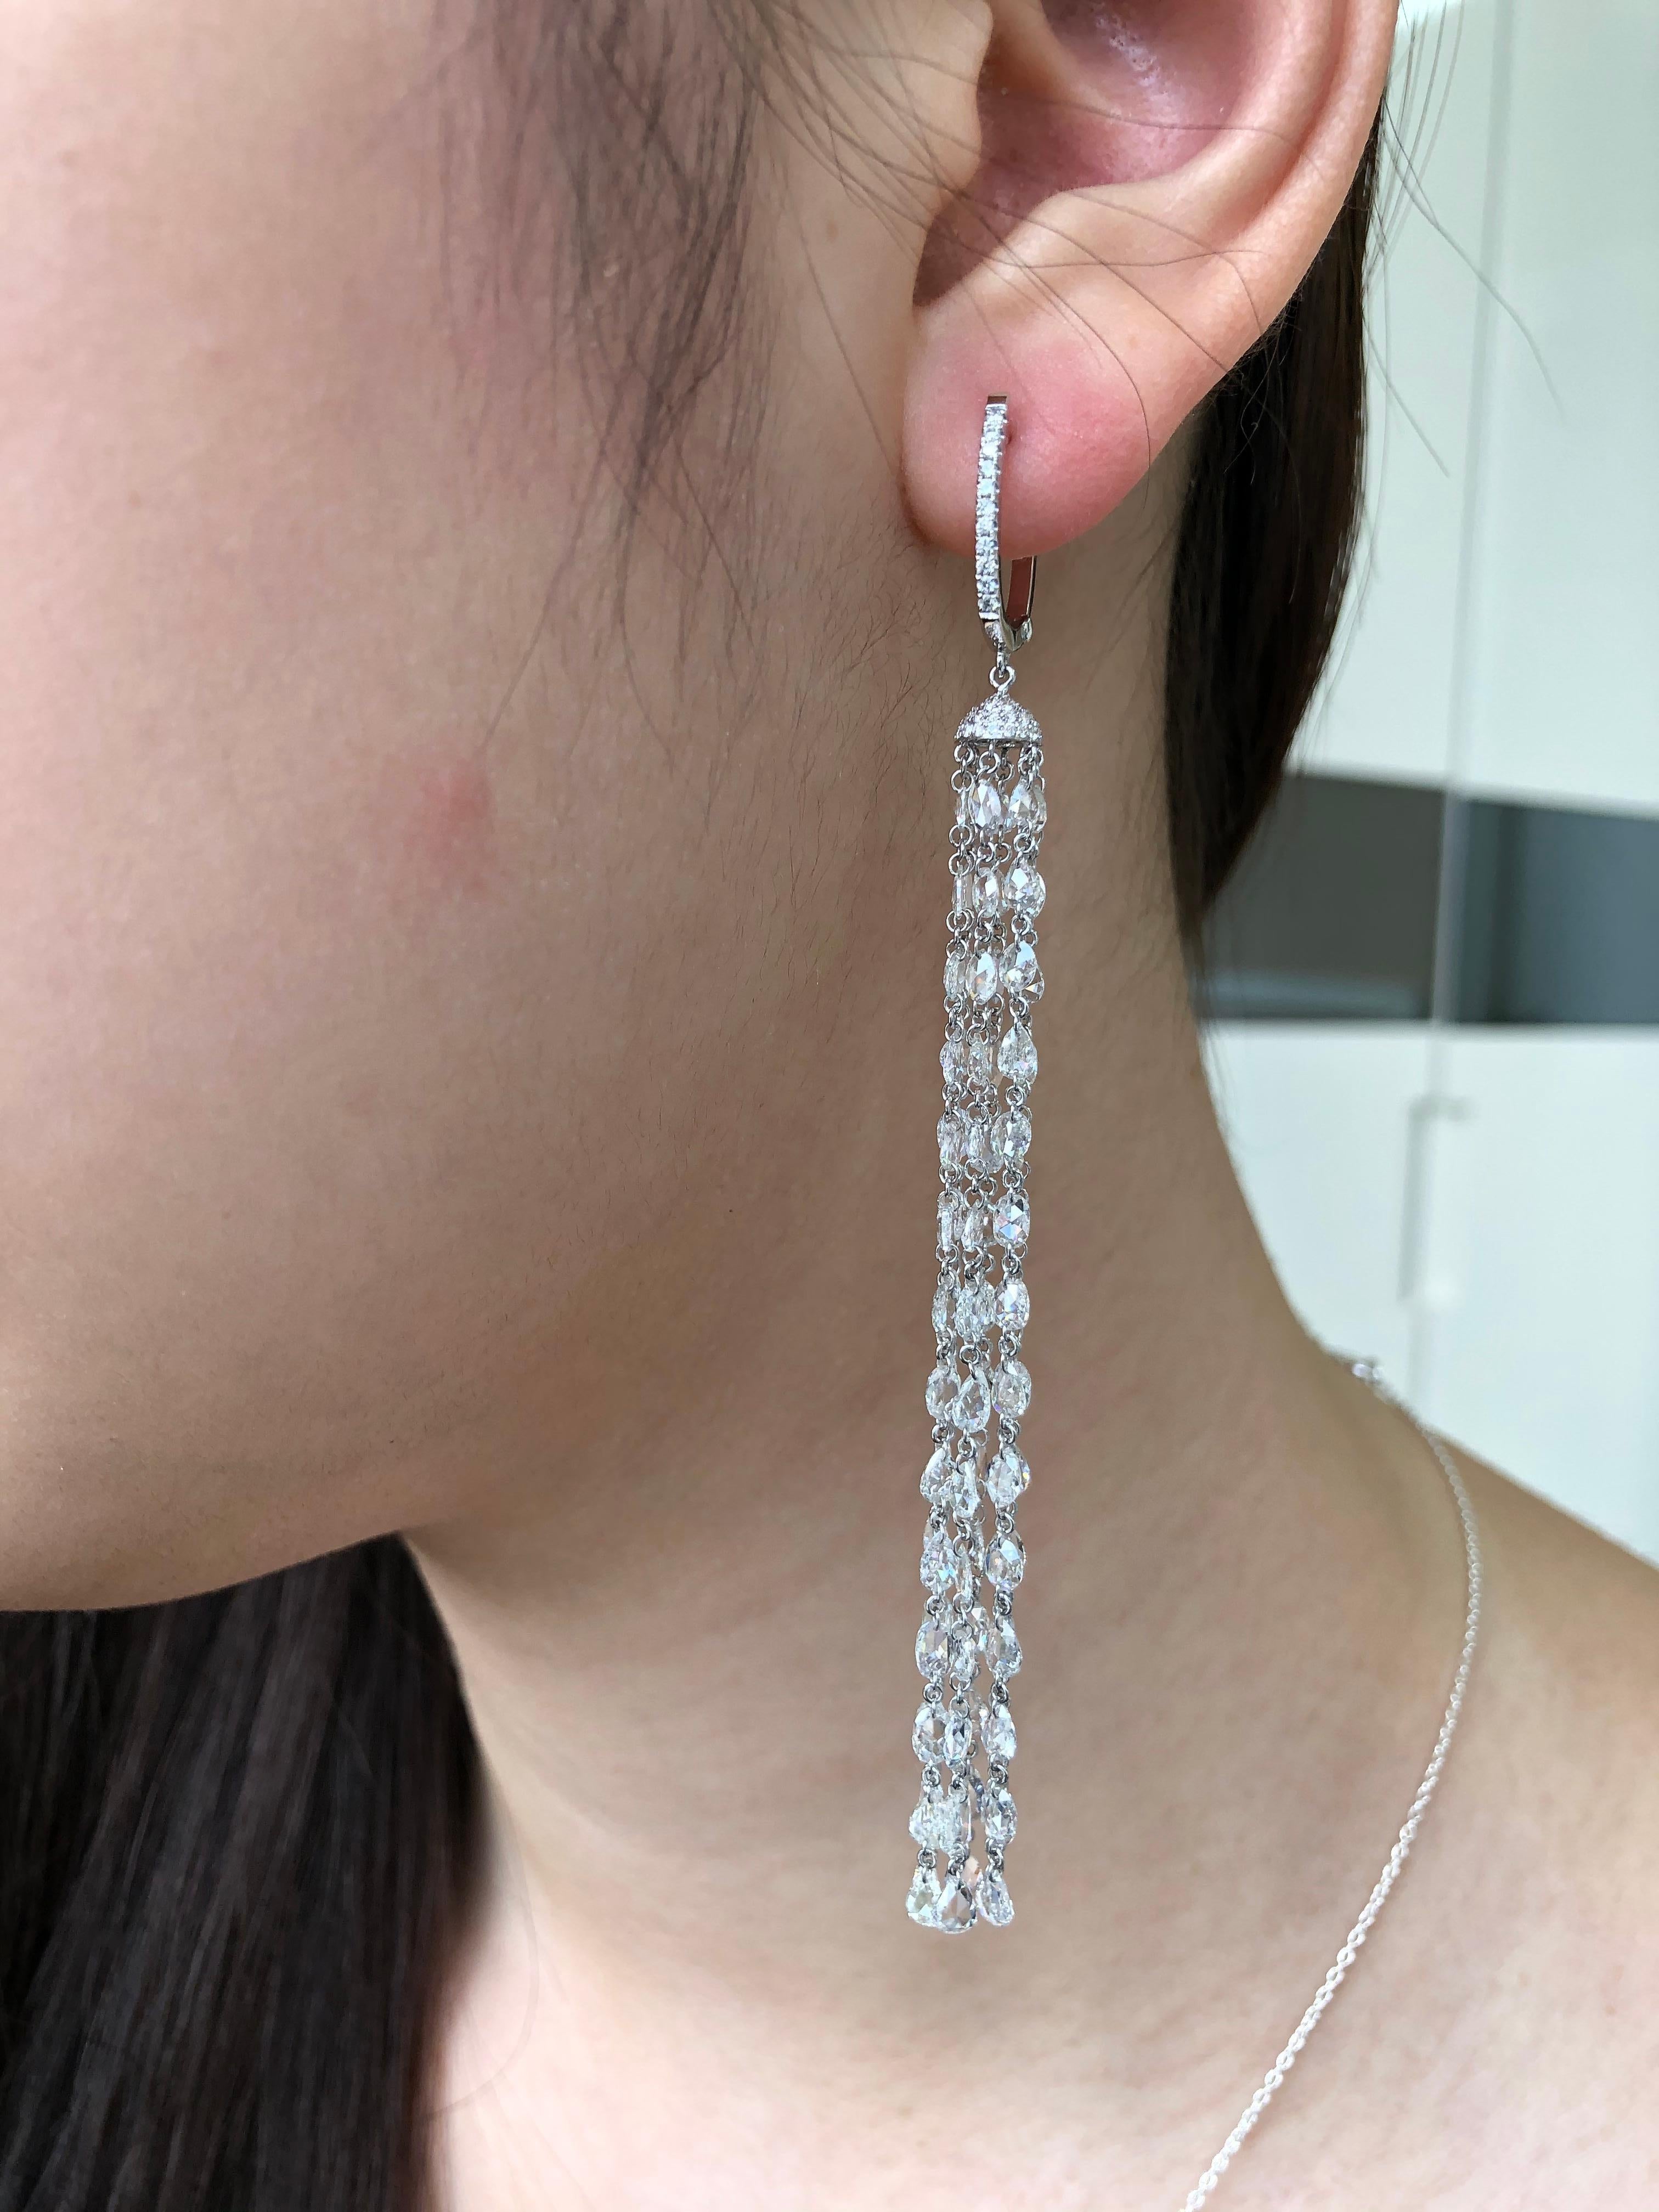 JR Rose Cut Diamond Tassel 18 Karat White Gold Earring

Stylish, graceful and elegant is what this pair of diamond tassel earring is. It moves with sheer grace and is made using excellent craftsmanship. its made using White Rose cut in the tassel &